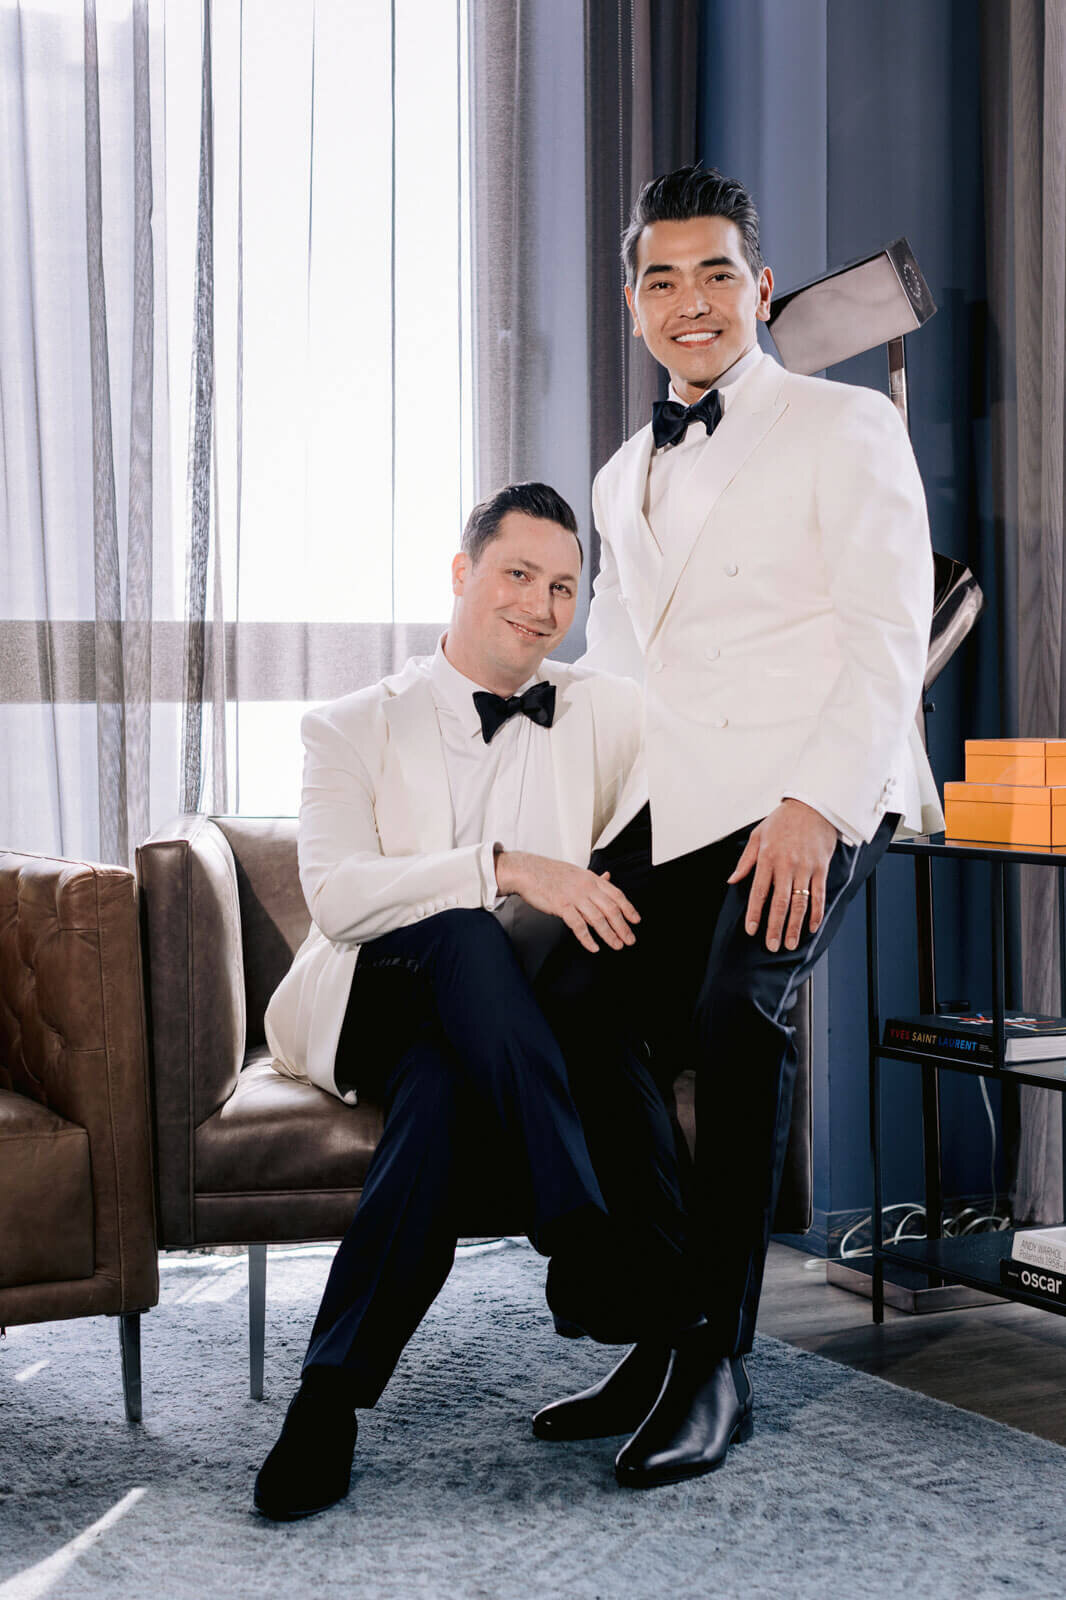 The grooms are wearing white suits and black bow tie in The Skylark, New York. Wedding Image by Jenny Fu Studio